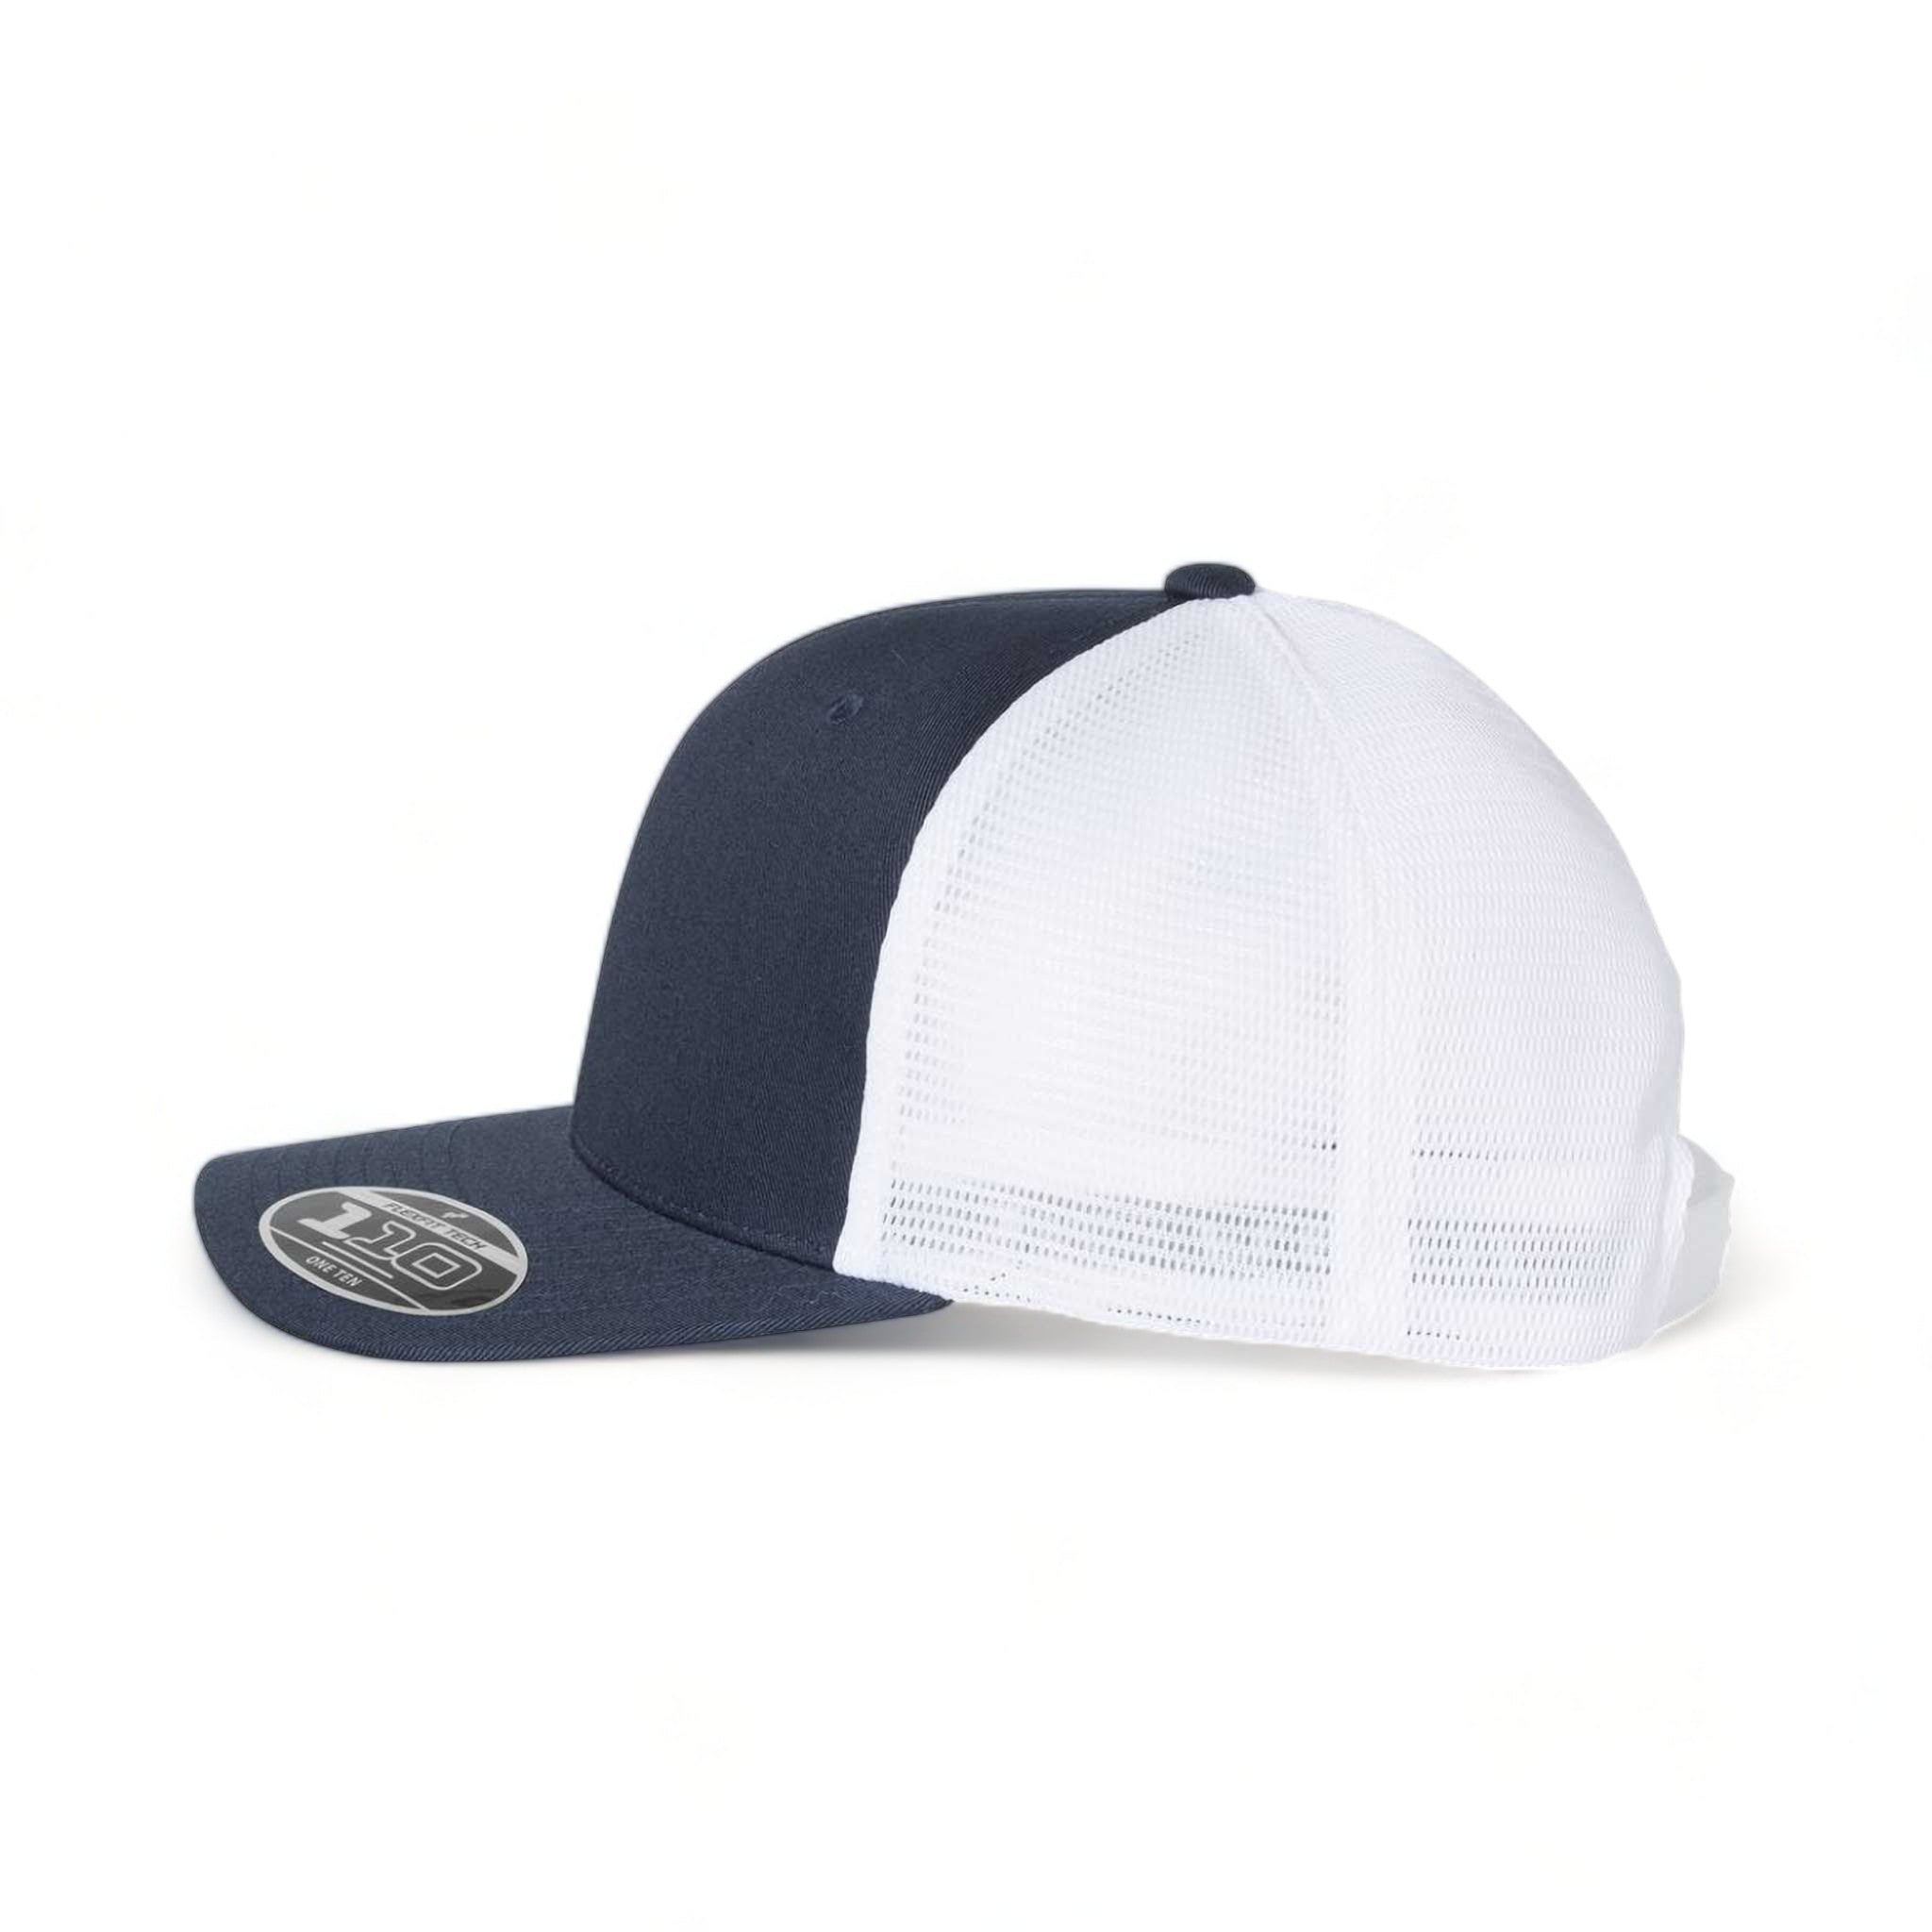 Side view of Flexfit 110M custom hat in navy and white